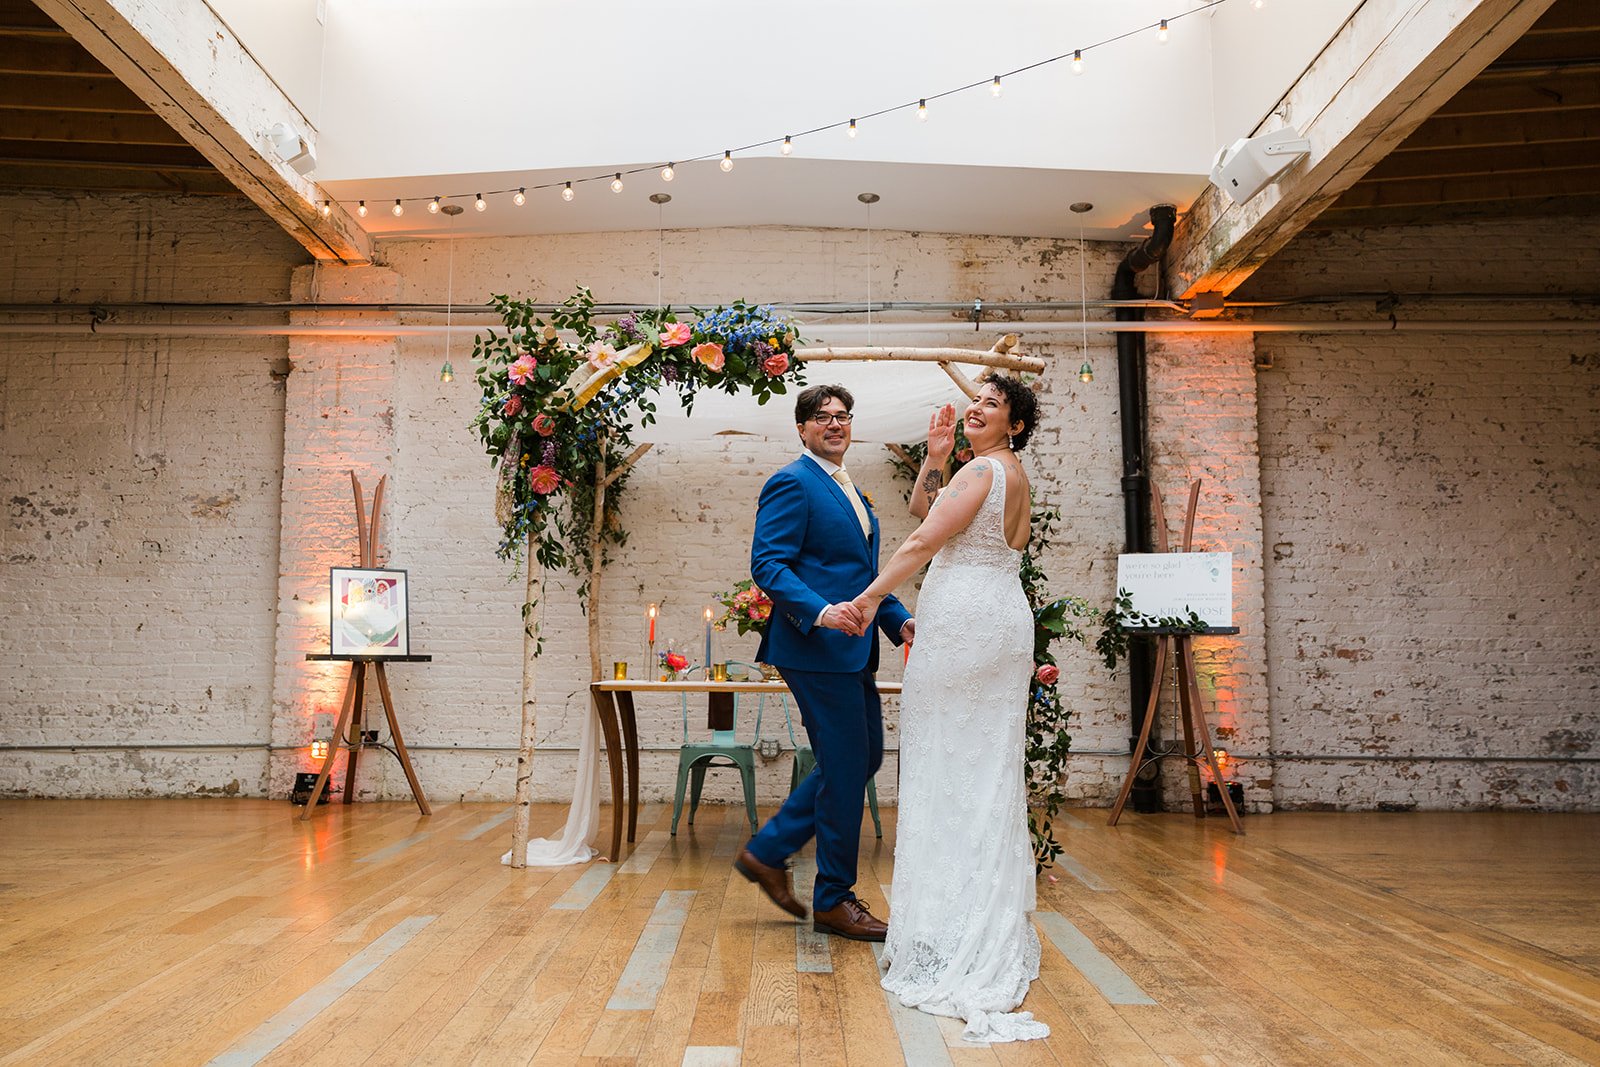  Documentary candid photo of bride and groom during first dance nontraditional Jewish and Venezuelan wedding at The Joinery Chicago an Industrial loft wedding venue In Logan Square.  